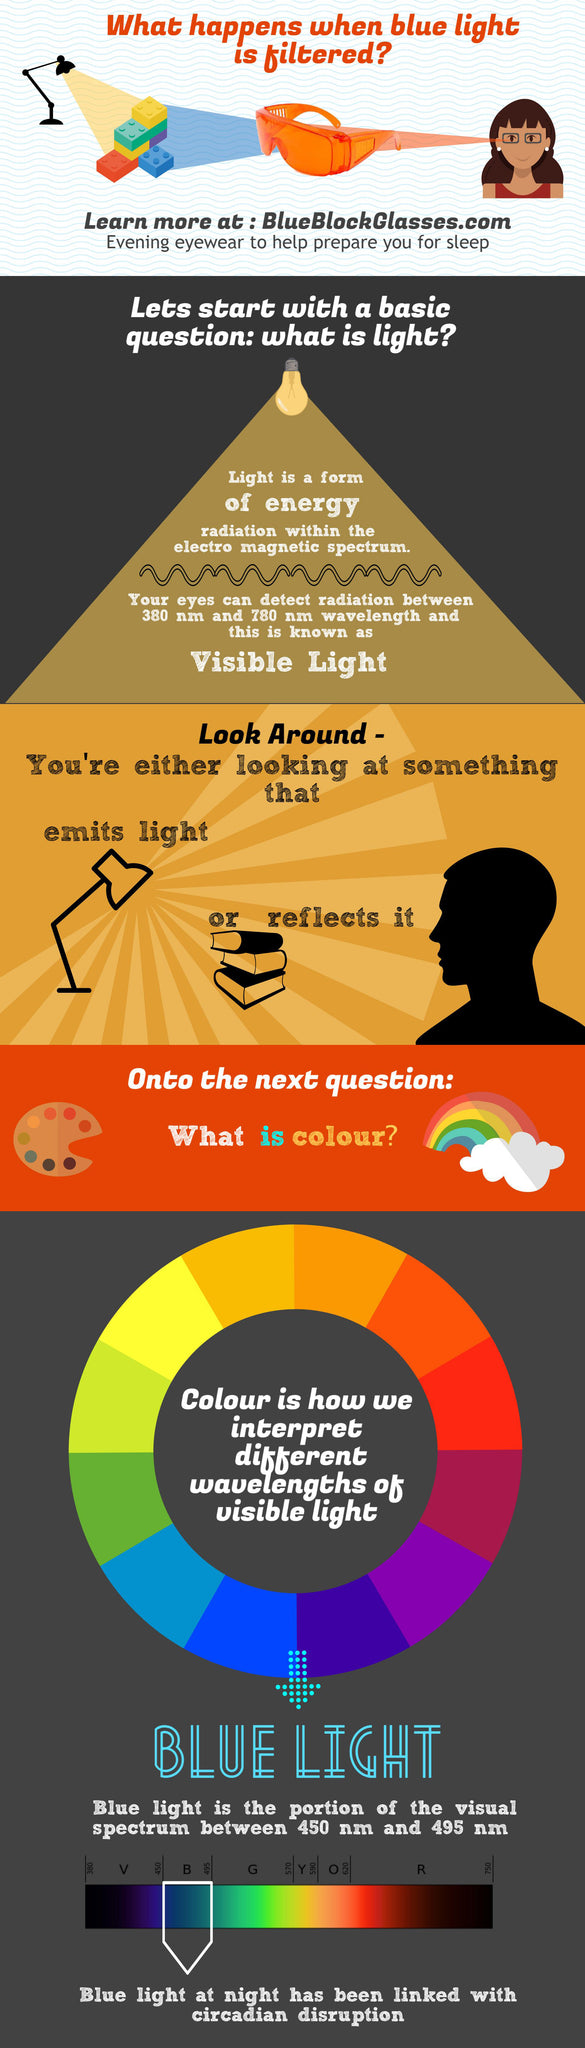 What happens when blue light is filtered? [infographic]